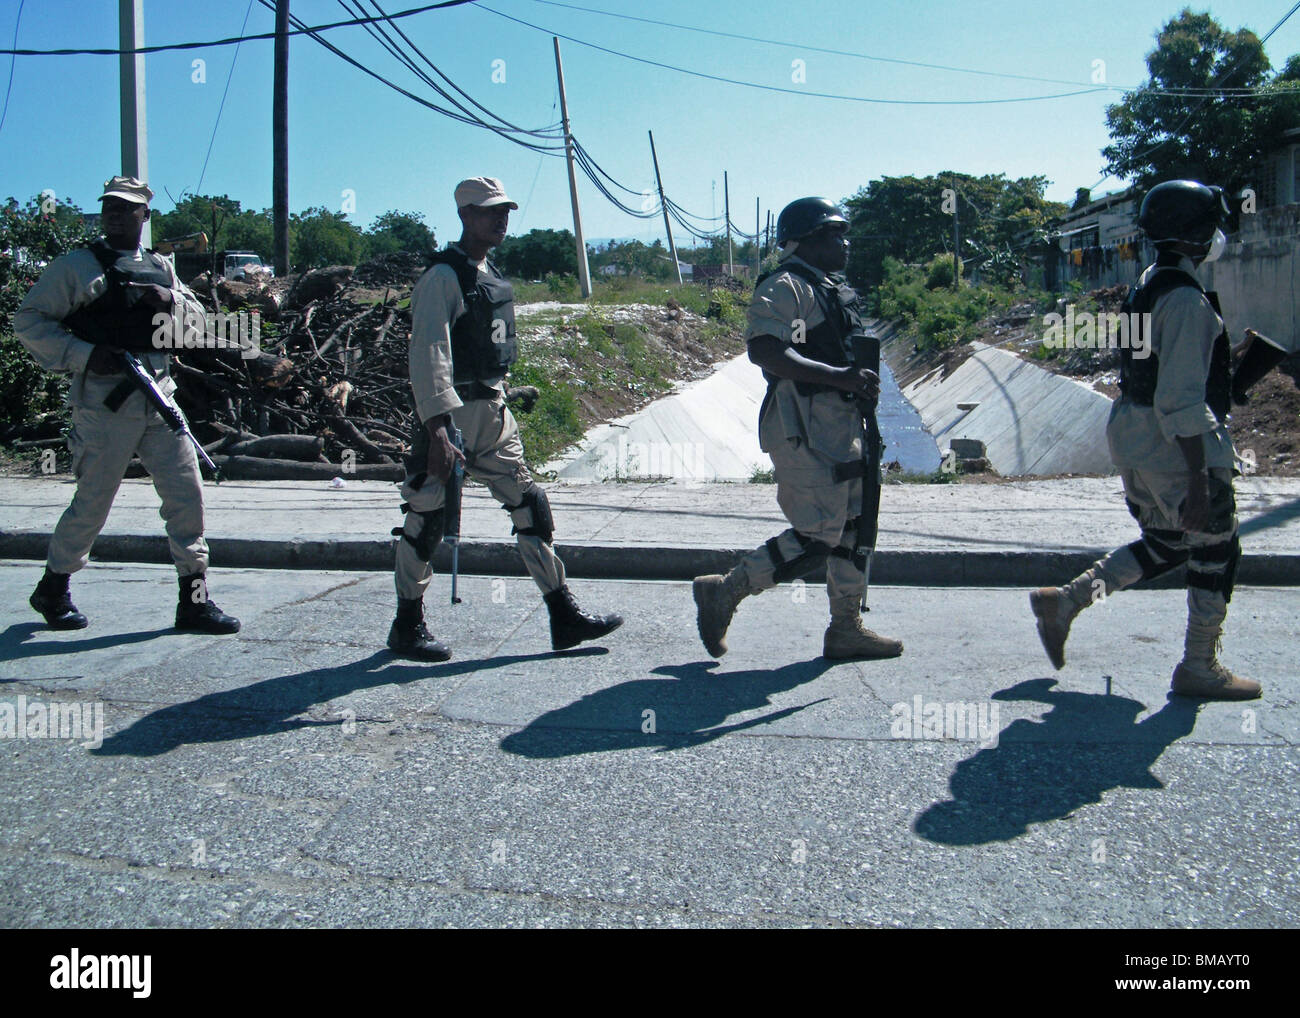 Members of the Hatian National Police patrol in Port au Prince after the Haiti earthquake Stock Photo